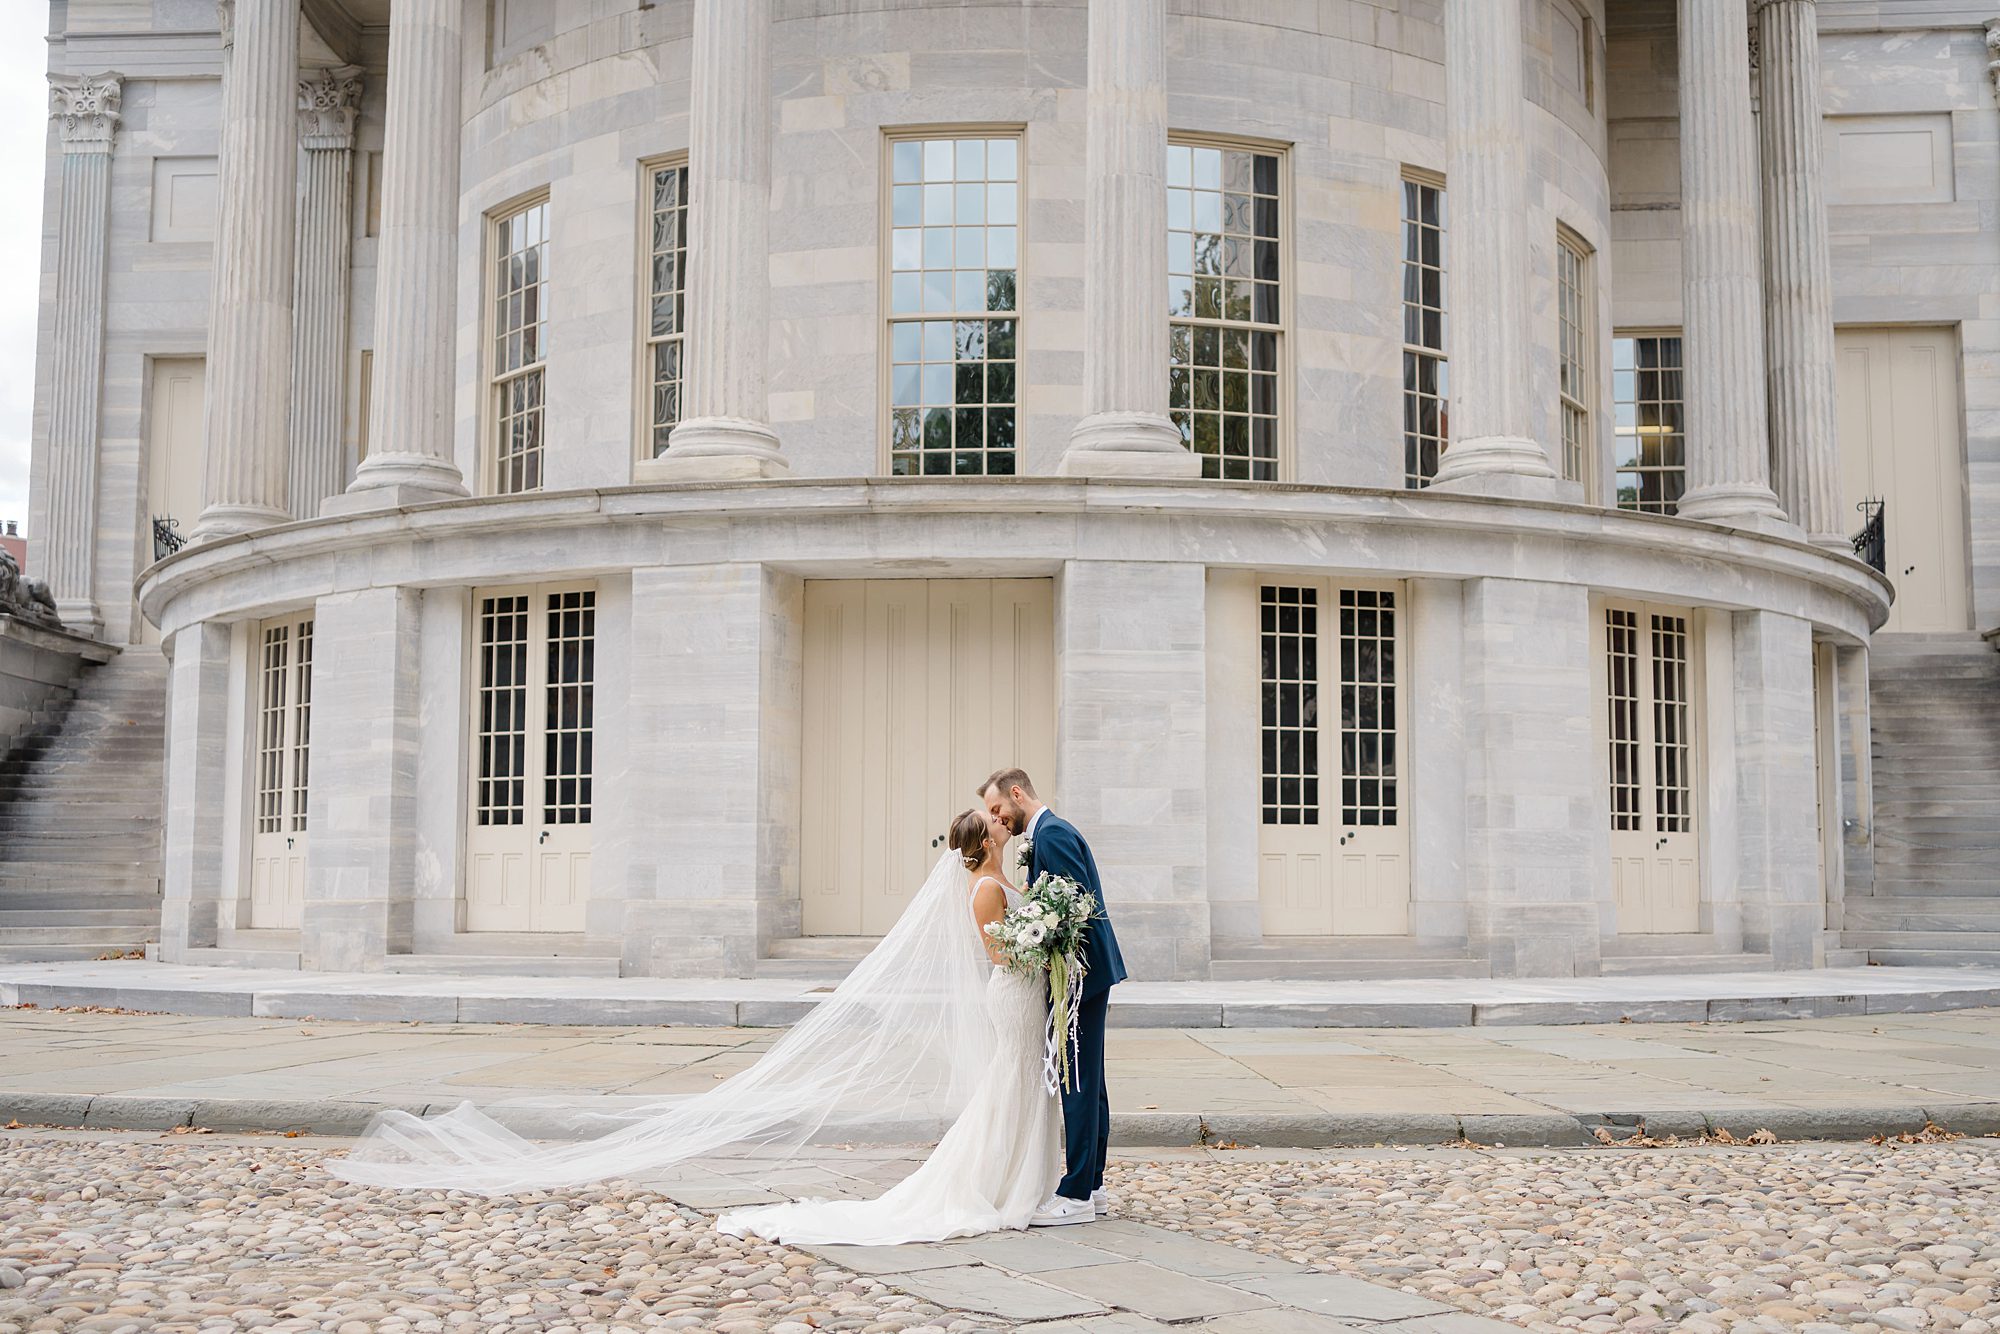 timeless wedding portaits at Merchant's Exchange building